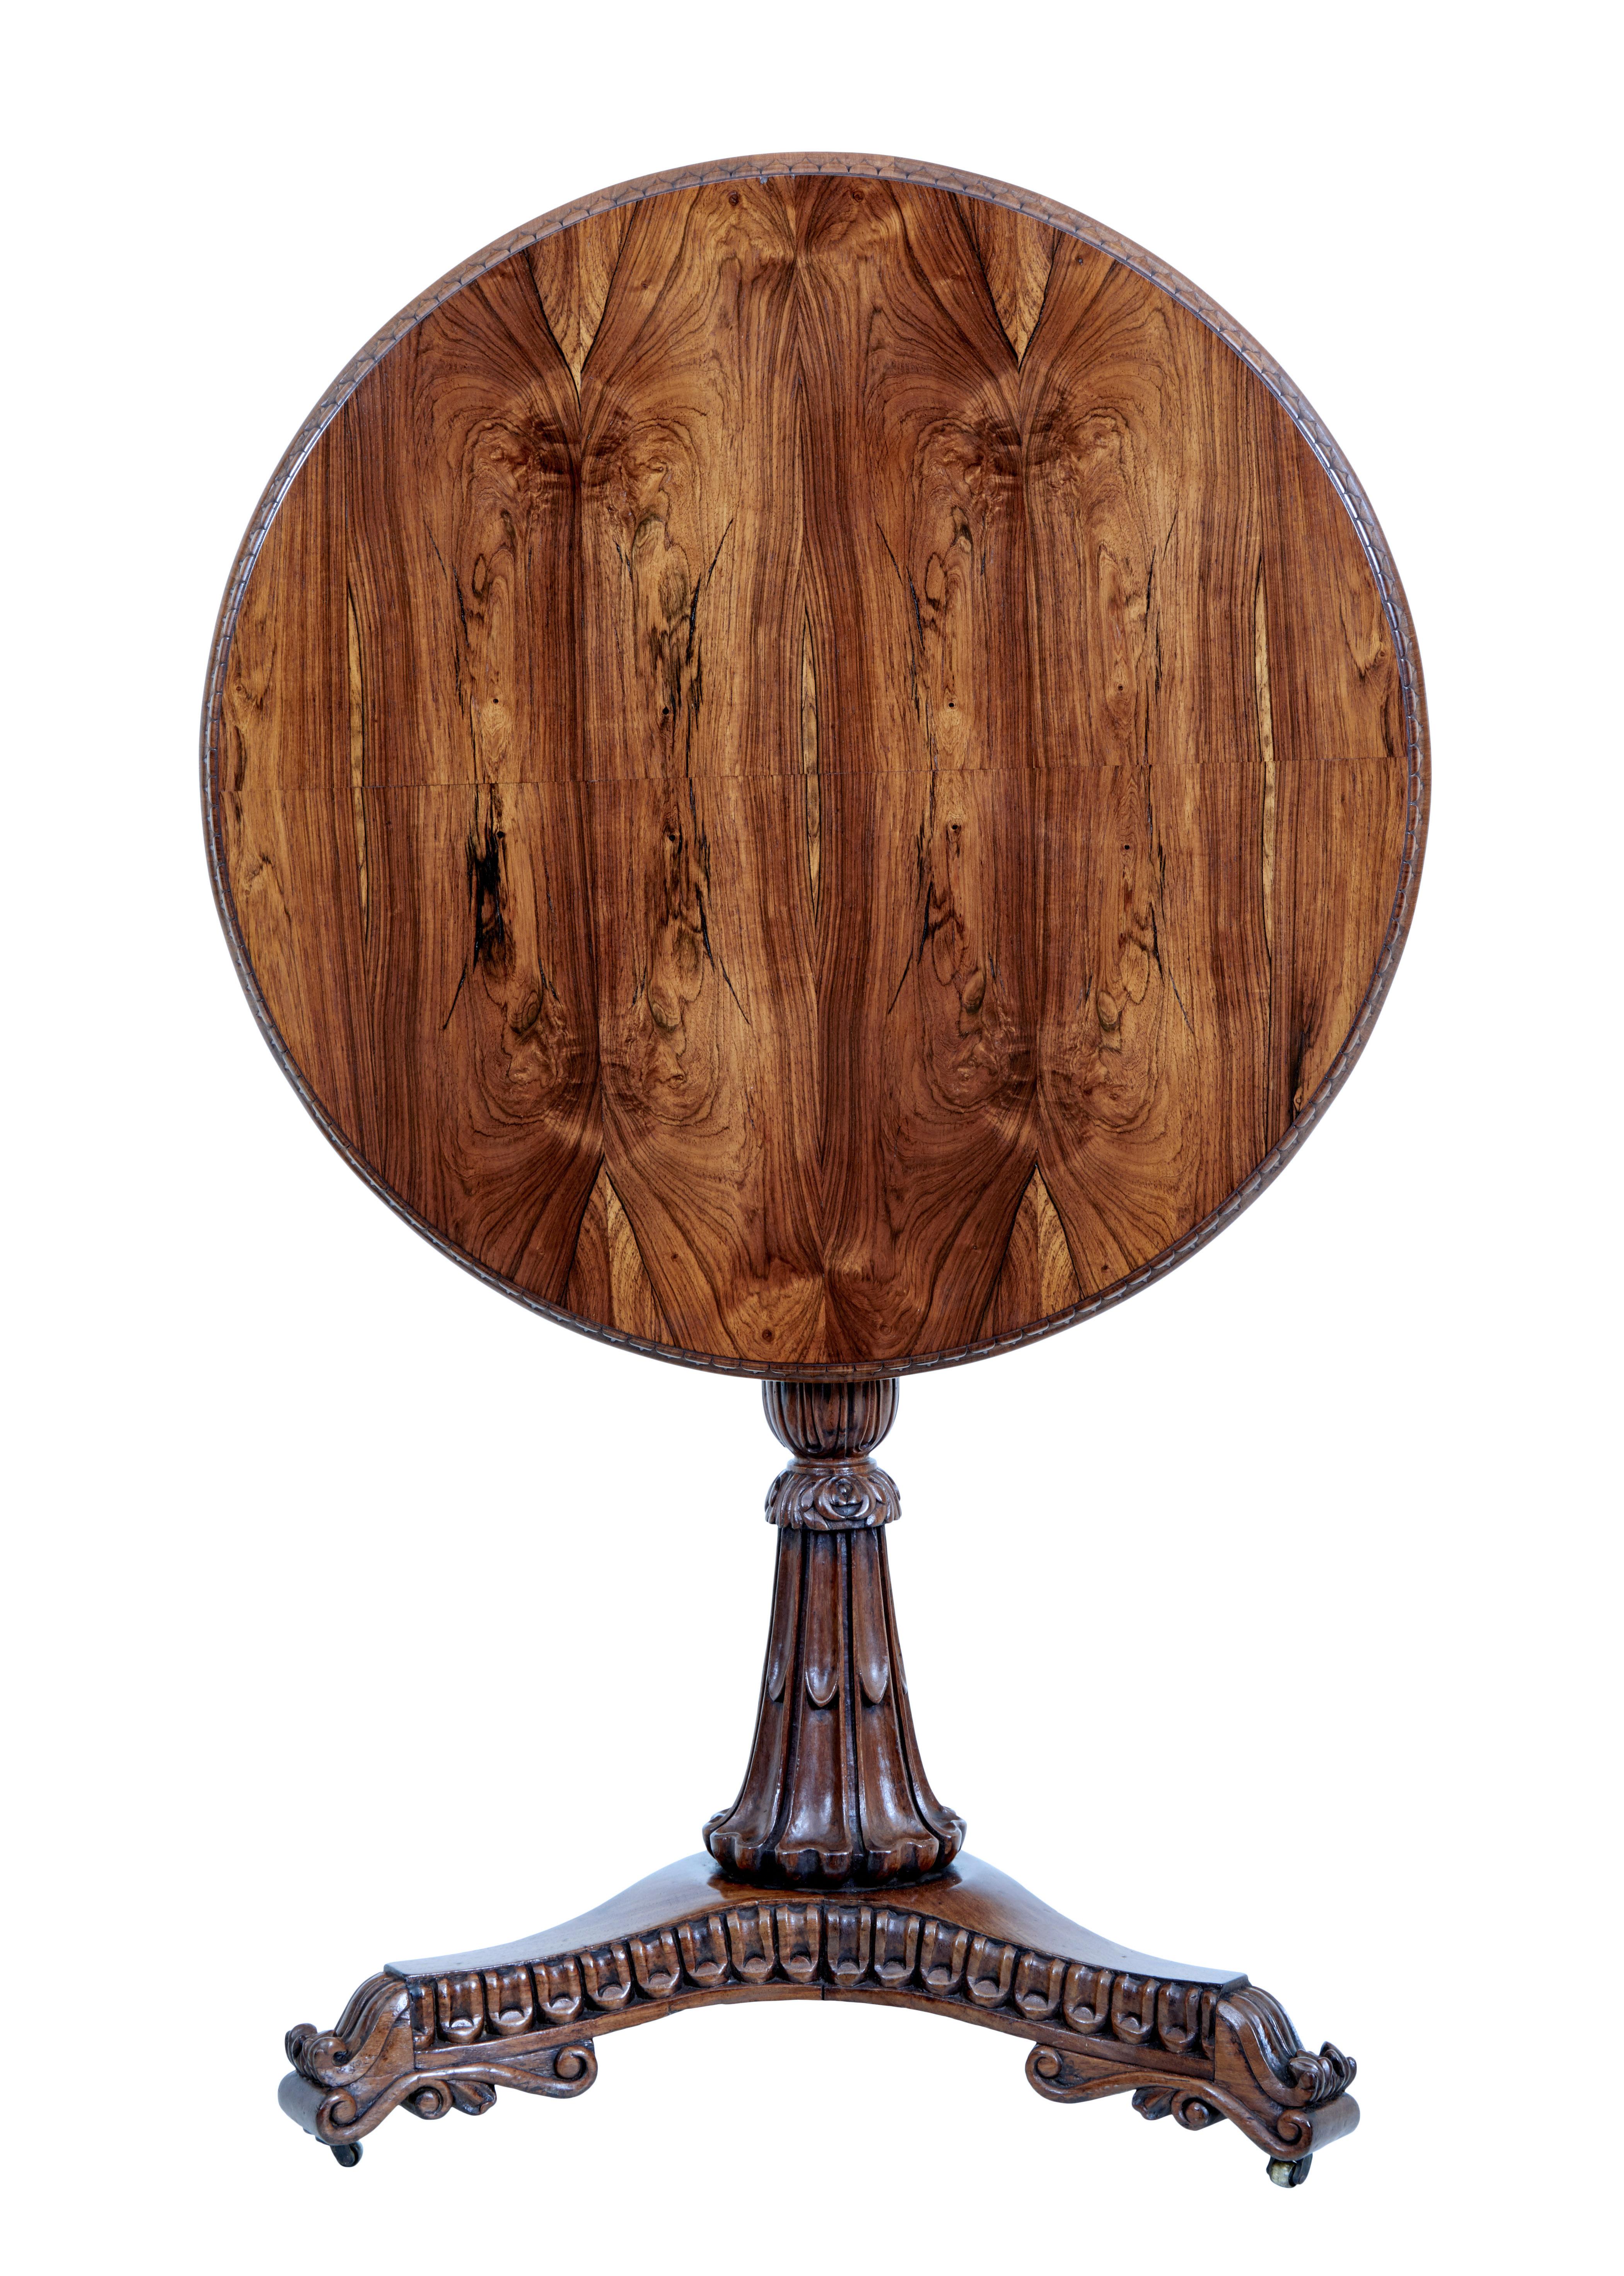 Circular occasional table veneered in striking palisander, decorated with a carved outer edge.

Turned and carved stem standing on a carved tripod base with scrolled feet and brass castors. Tilting top.

Rich golden colour.

Minor surface